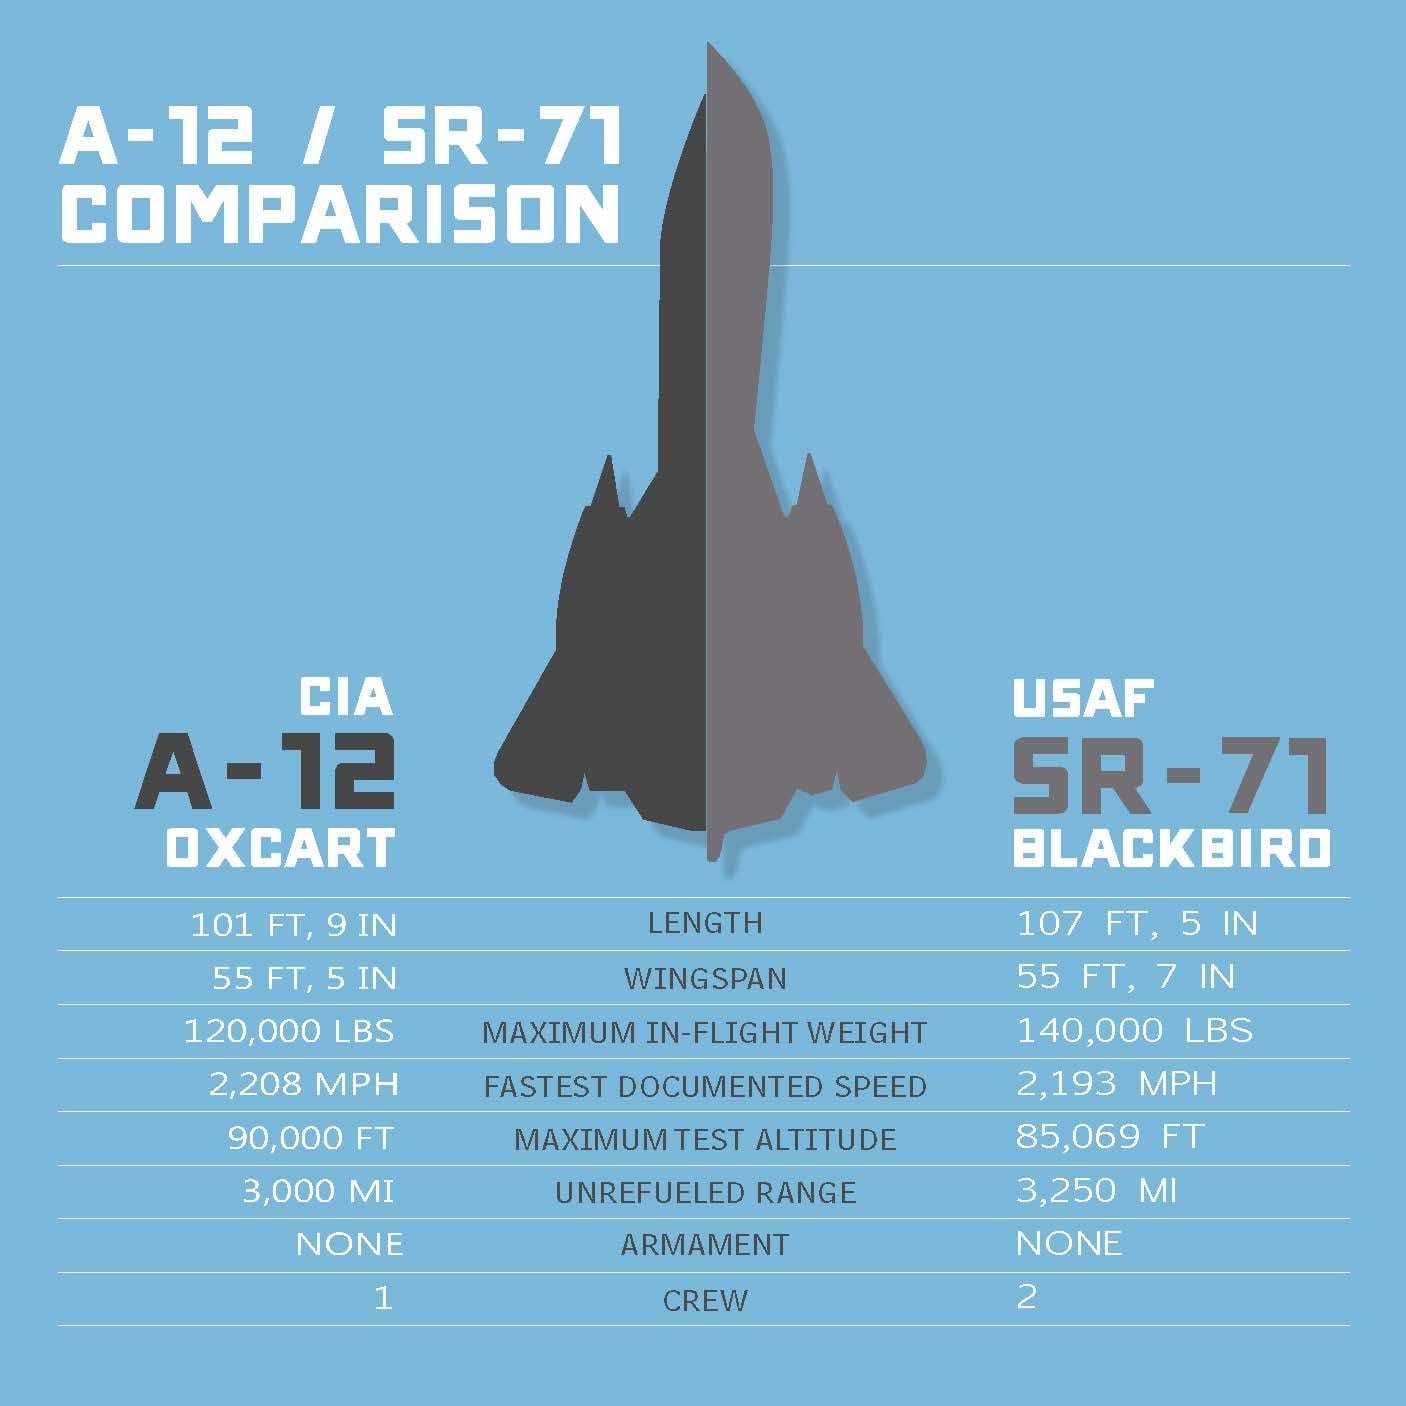 A blue poster titled "A-12/SR-71 Comparison" with an aircraft graphic and various statistics.